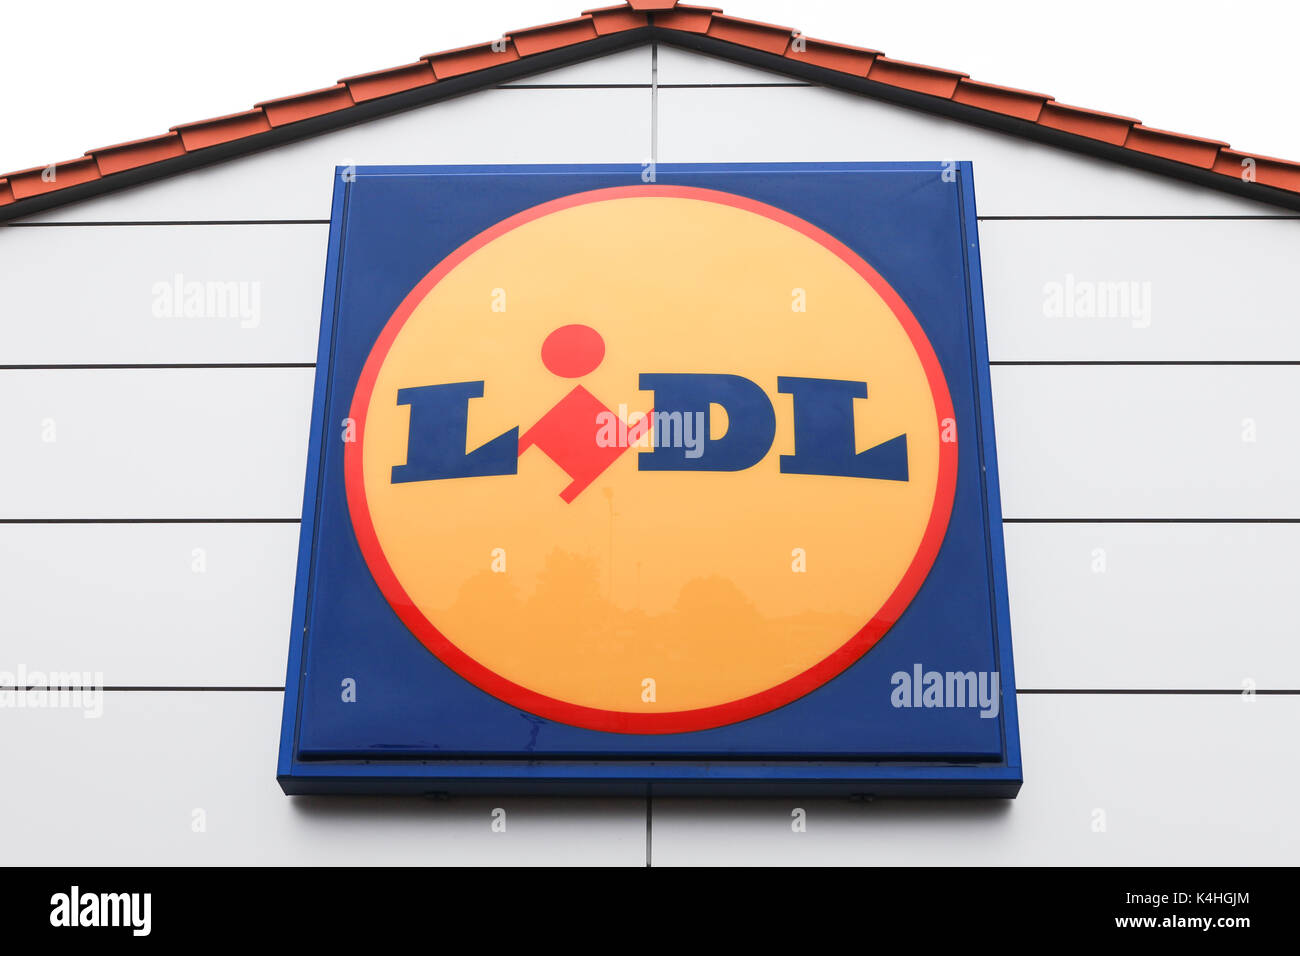 Lidl sign. Lidl Stiftung & Co. is a German global discount supermarket chain, based in Neckarsulm, Germany Stock Photo